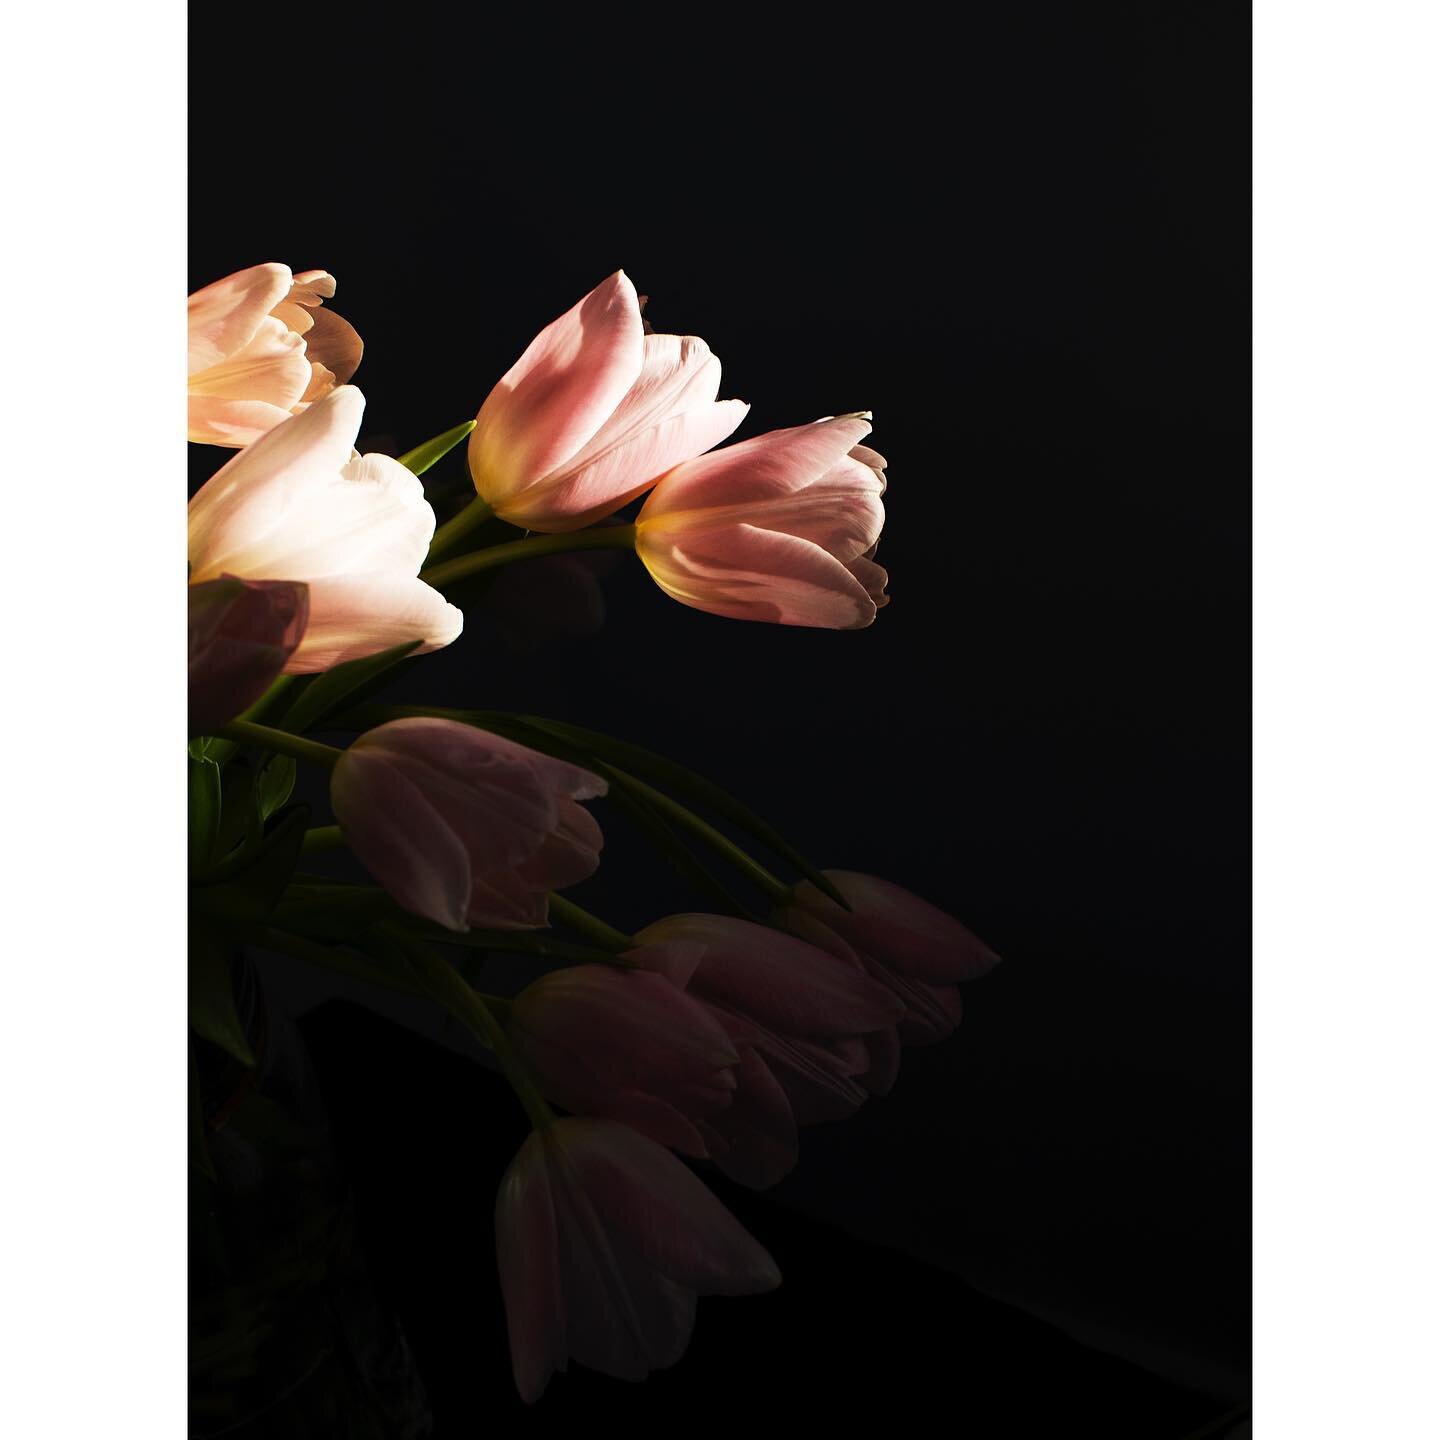 Tulips in afternoon light.
:

Yesterday I had no intention of taking a photo of these flowers. Actually, I was moving the piles of books off my desk to snap photos of a recipe I was working on. Simply, I was moved by their simple beauty, and the mome